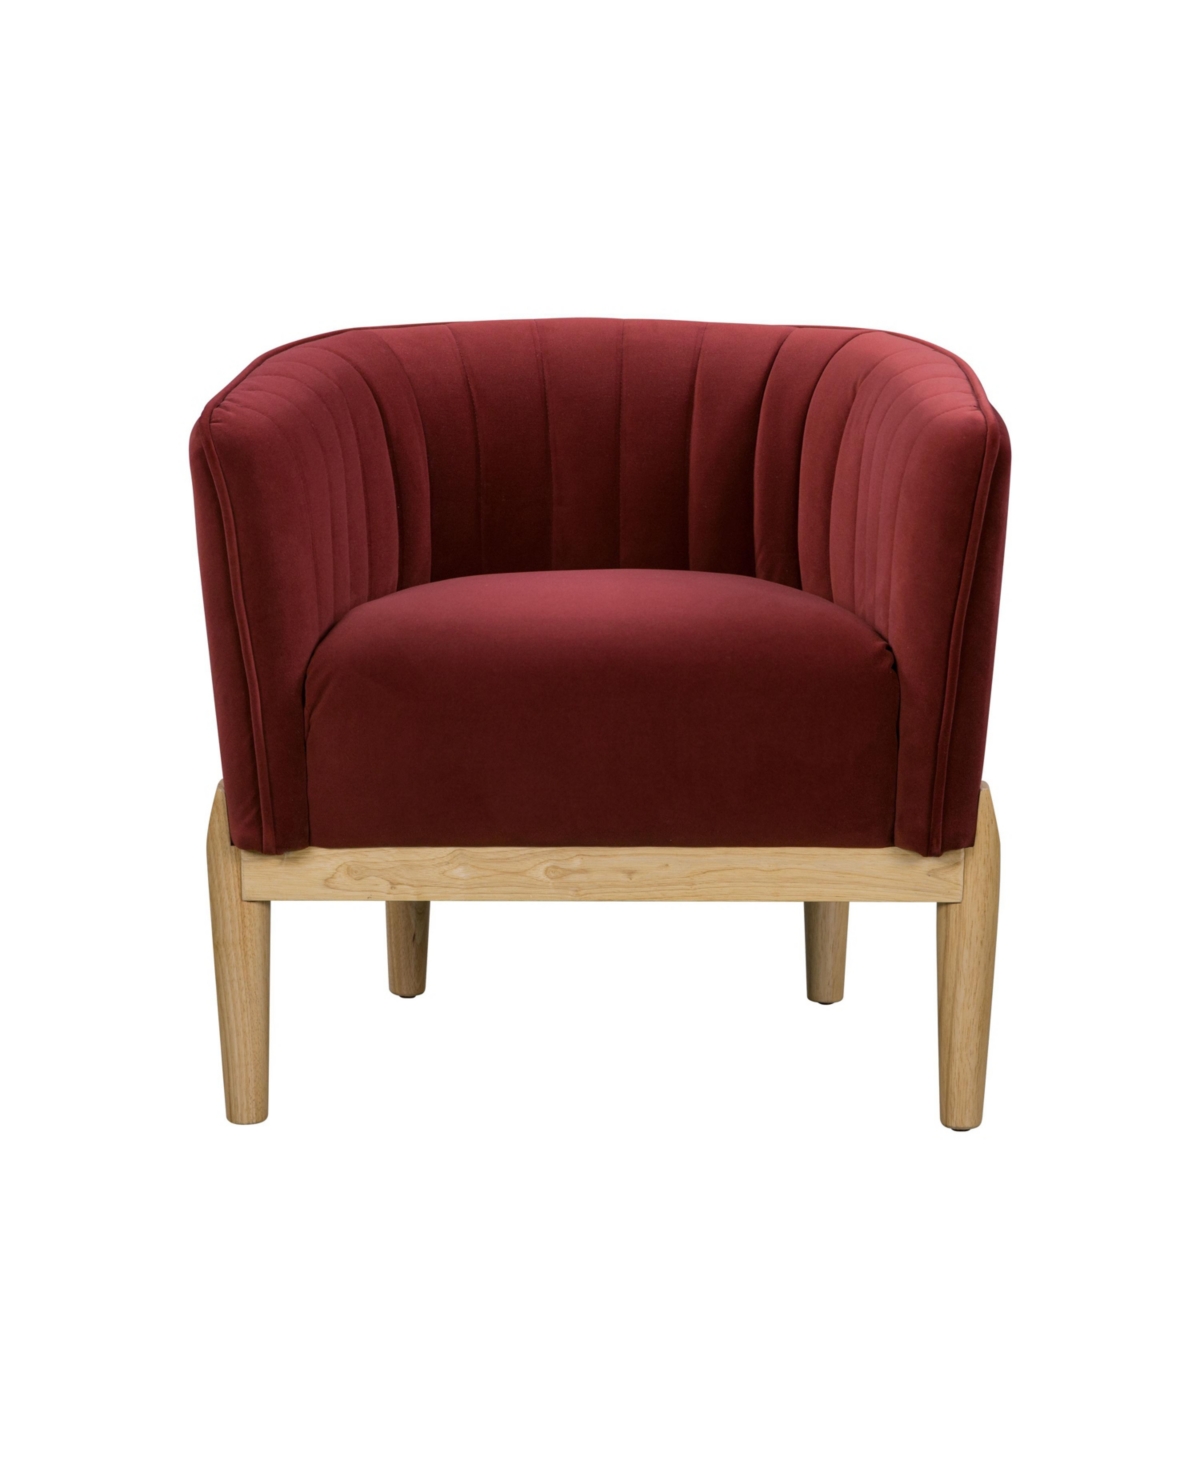 Lifestyle Solutions 30.7" Velvet Catriona Accent Chair In Cinnamon